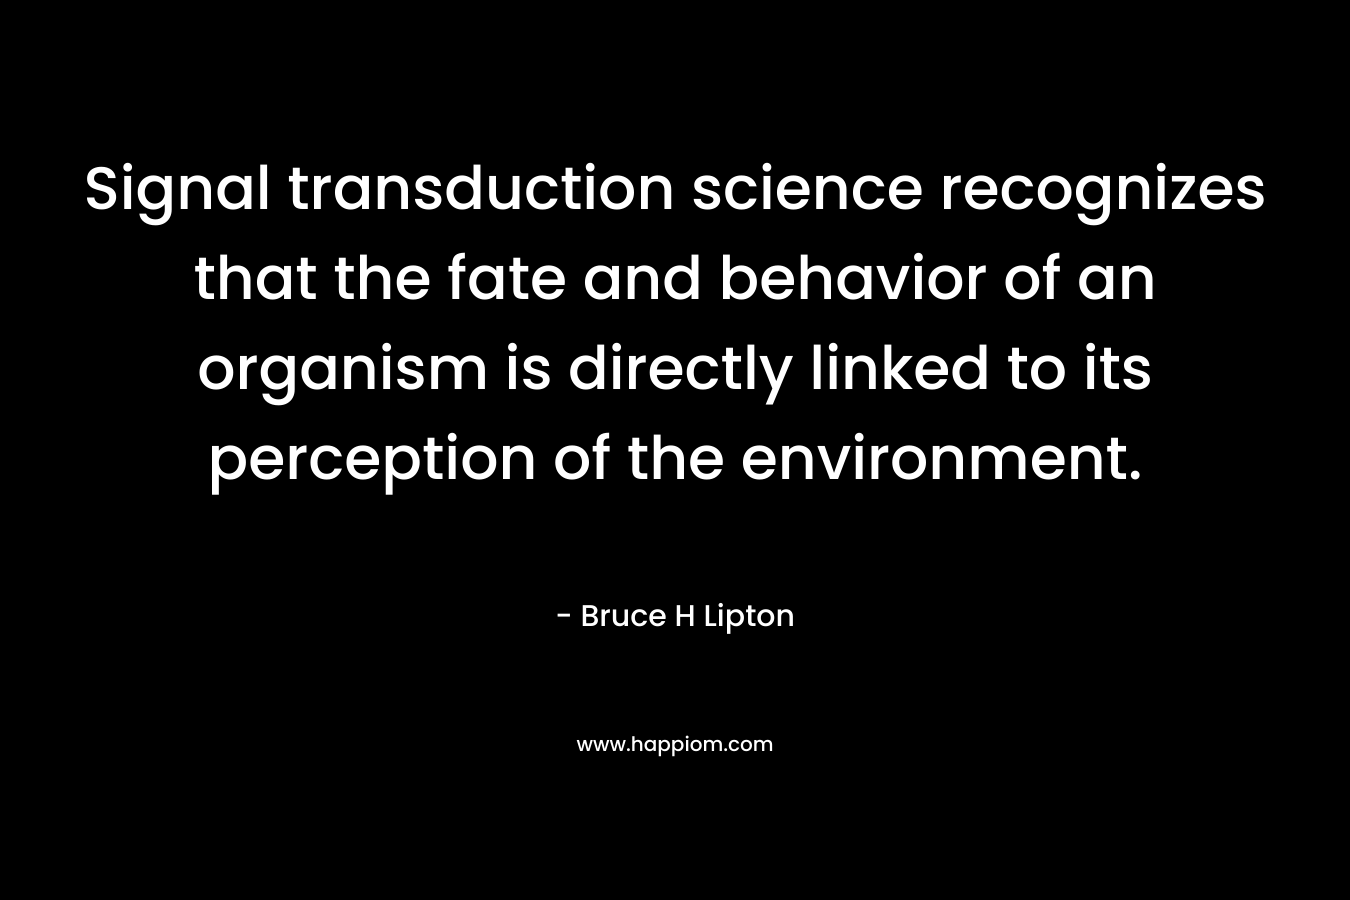 Signal transduction science recognizes that the fate and behavior of an organism is directly linked to its perception of the environment. – Bruce H Lipton